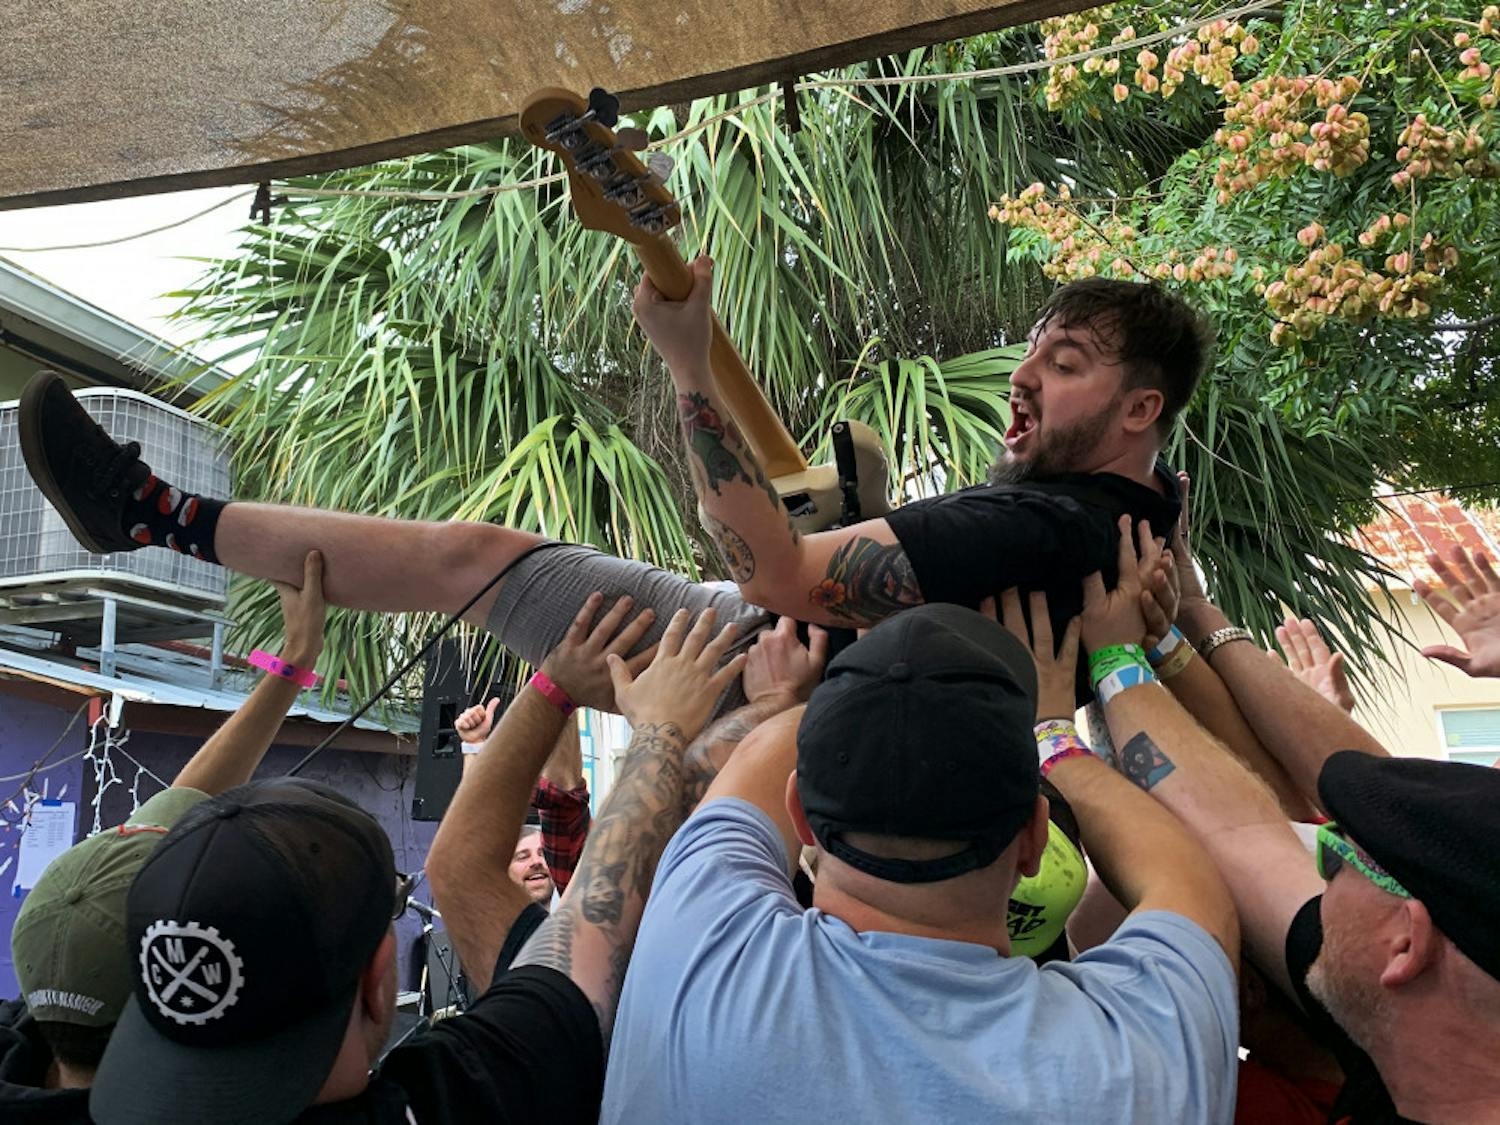 Bobby Edge, vocalist and bass player for the band Jukebox Romantics, crowd surfs during the middle of his set at the Civic Media Center. “Honestly, my favorite thing is seeing all these faces I’ve seen from different countries come here and we all hang out,” Edge said. “Everyone’s in this one central location and it’s f—king amazing.”